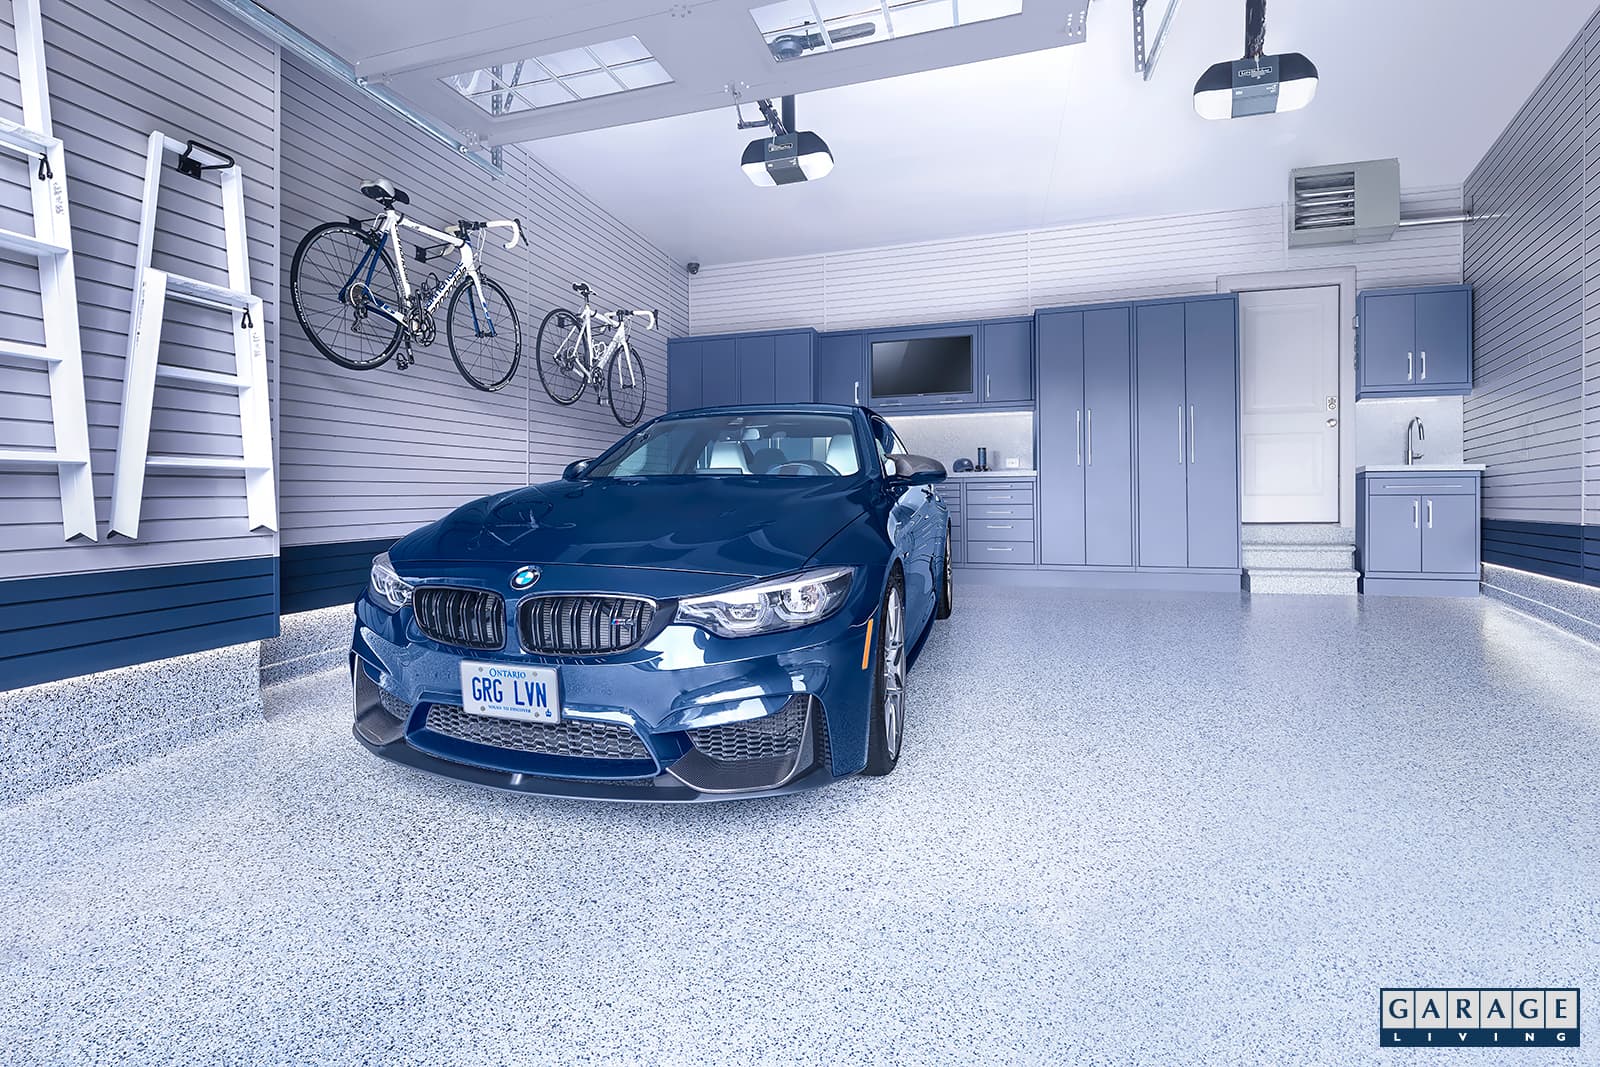 A Driving Enthusiast's Garage